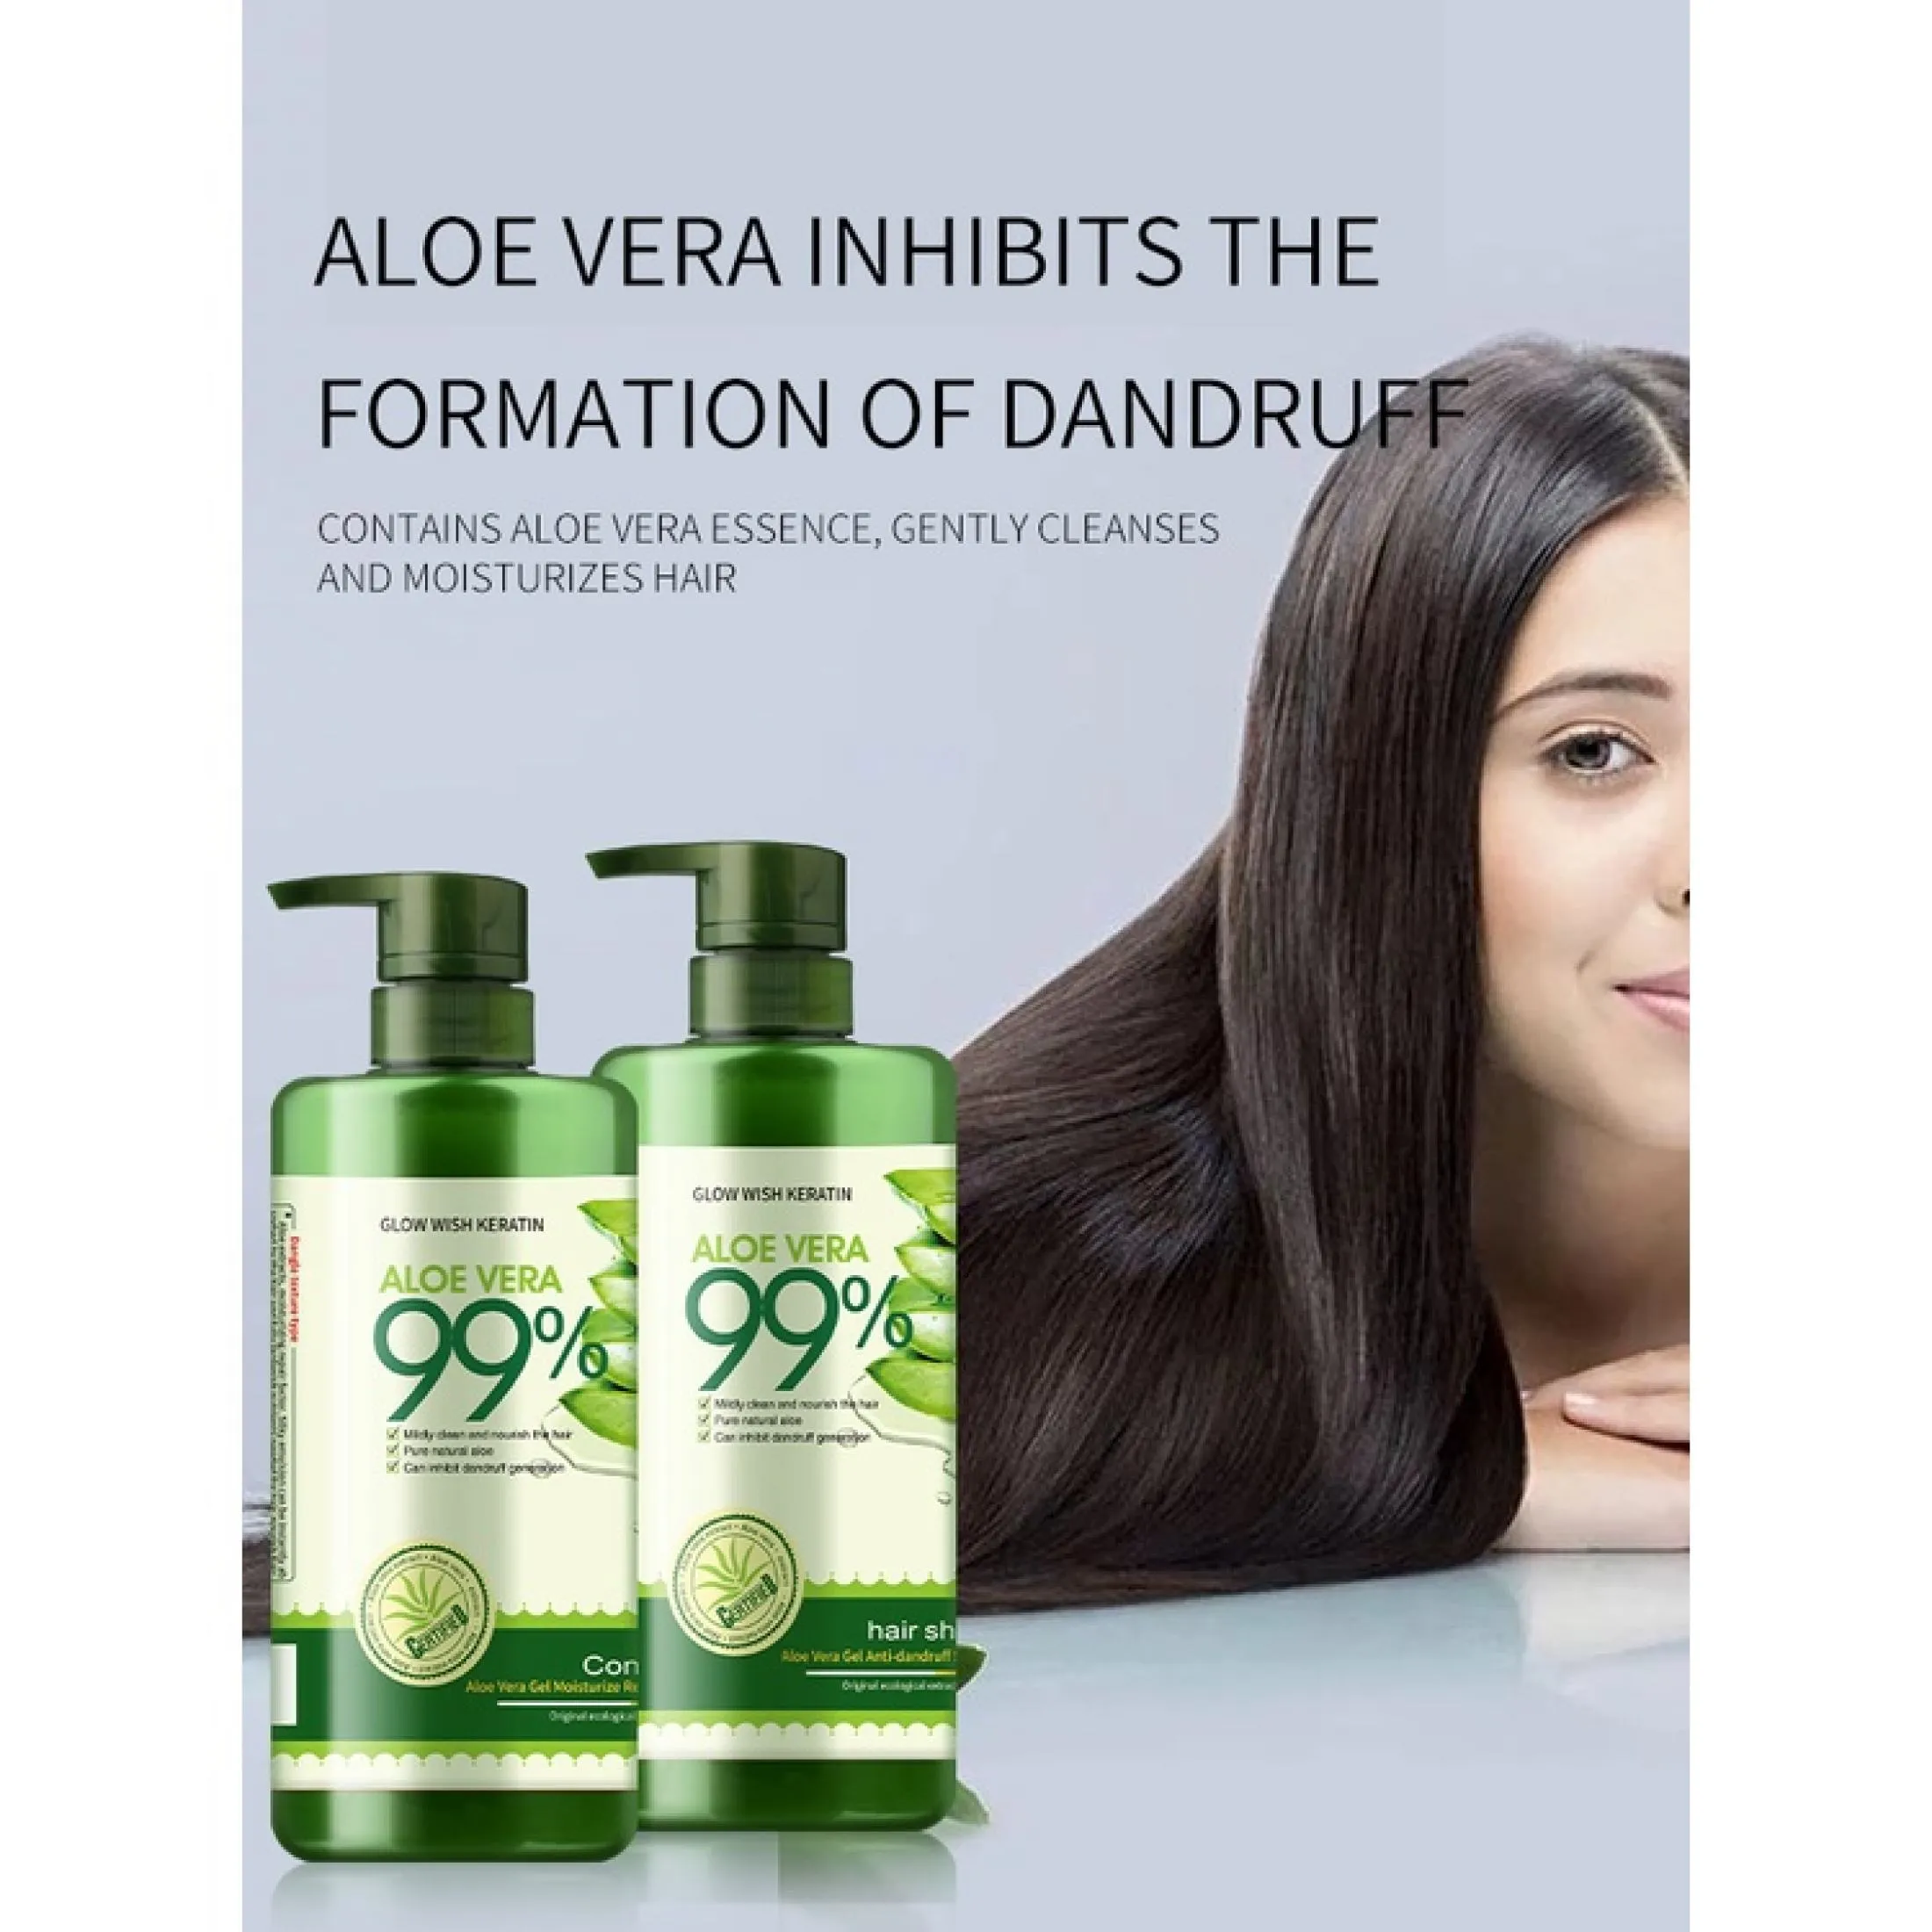 aloe vera shampoo and conditioner Original 100% Aloe Vera Anti-Dandruff  Shampoo 800ml and Aloe Vera Nourishing Conditioner 800ml to Help Hair Growth  and Prevent Hair Loss (FDA Approved) conditioner for hair aloe